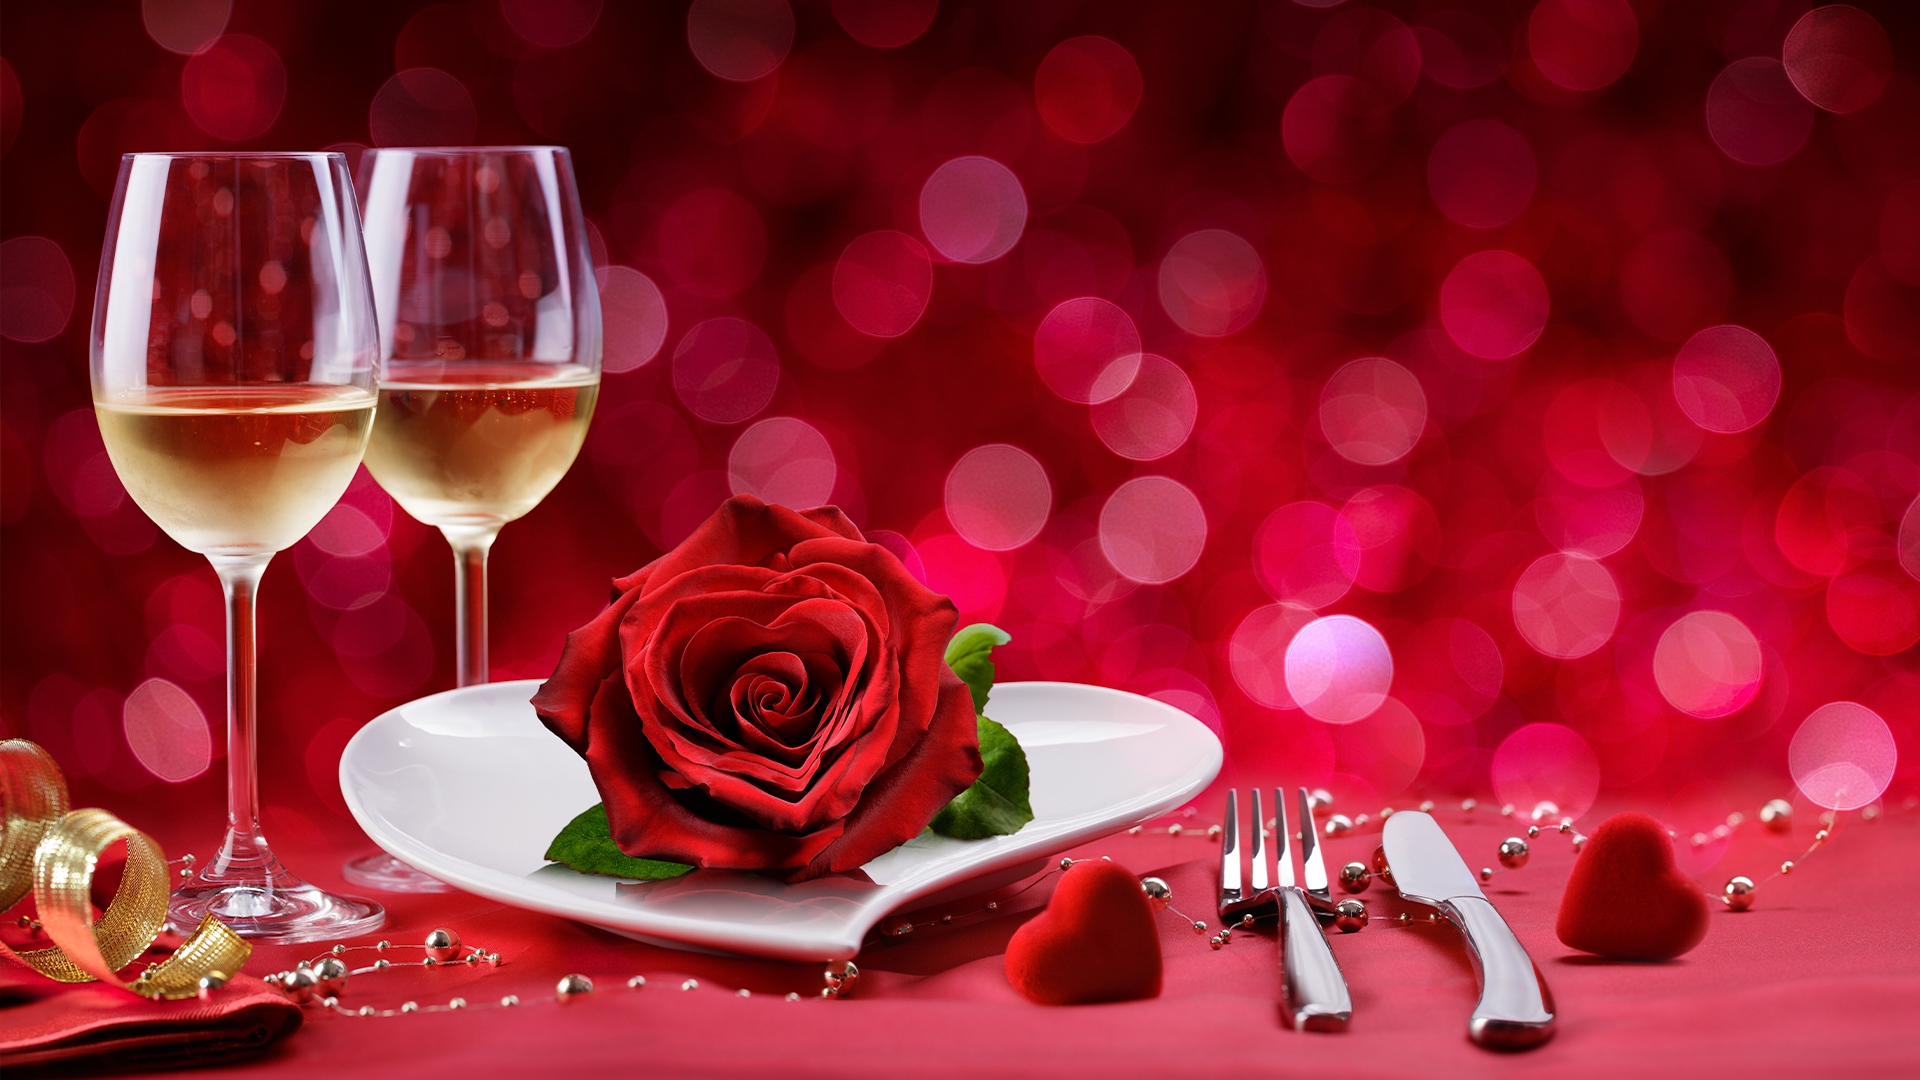 ### Wine and Roses ###